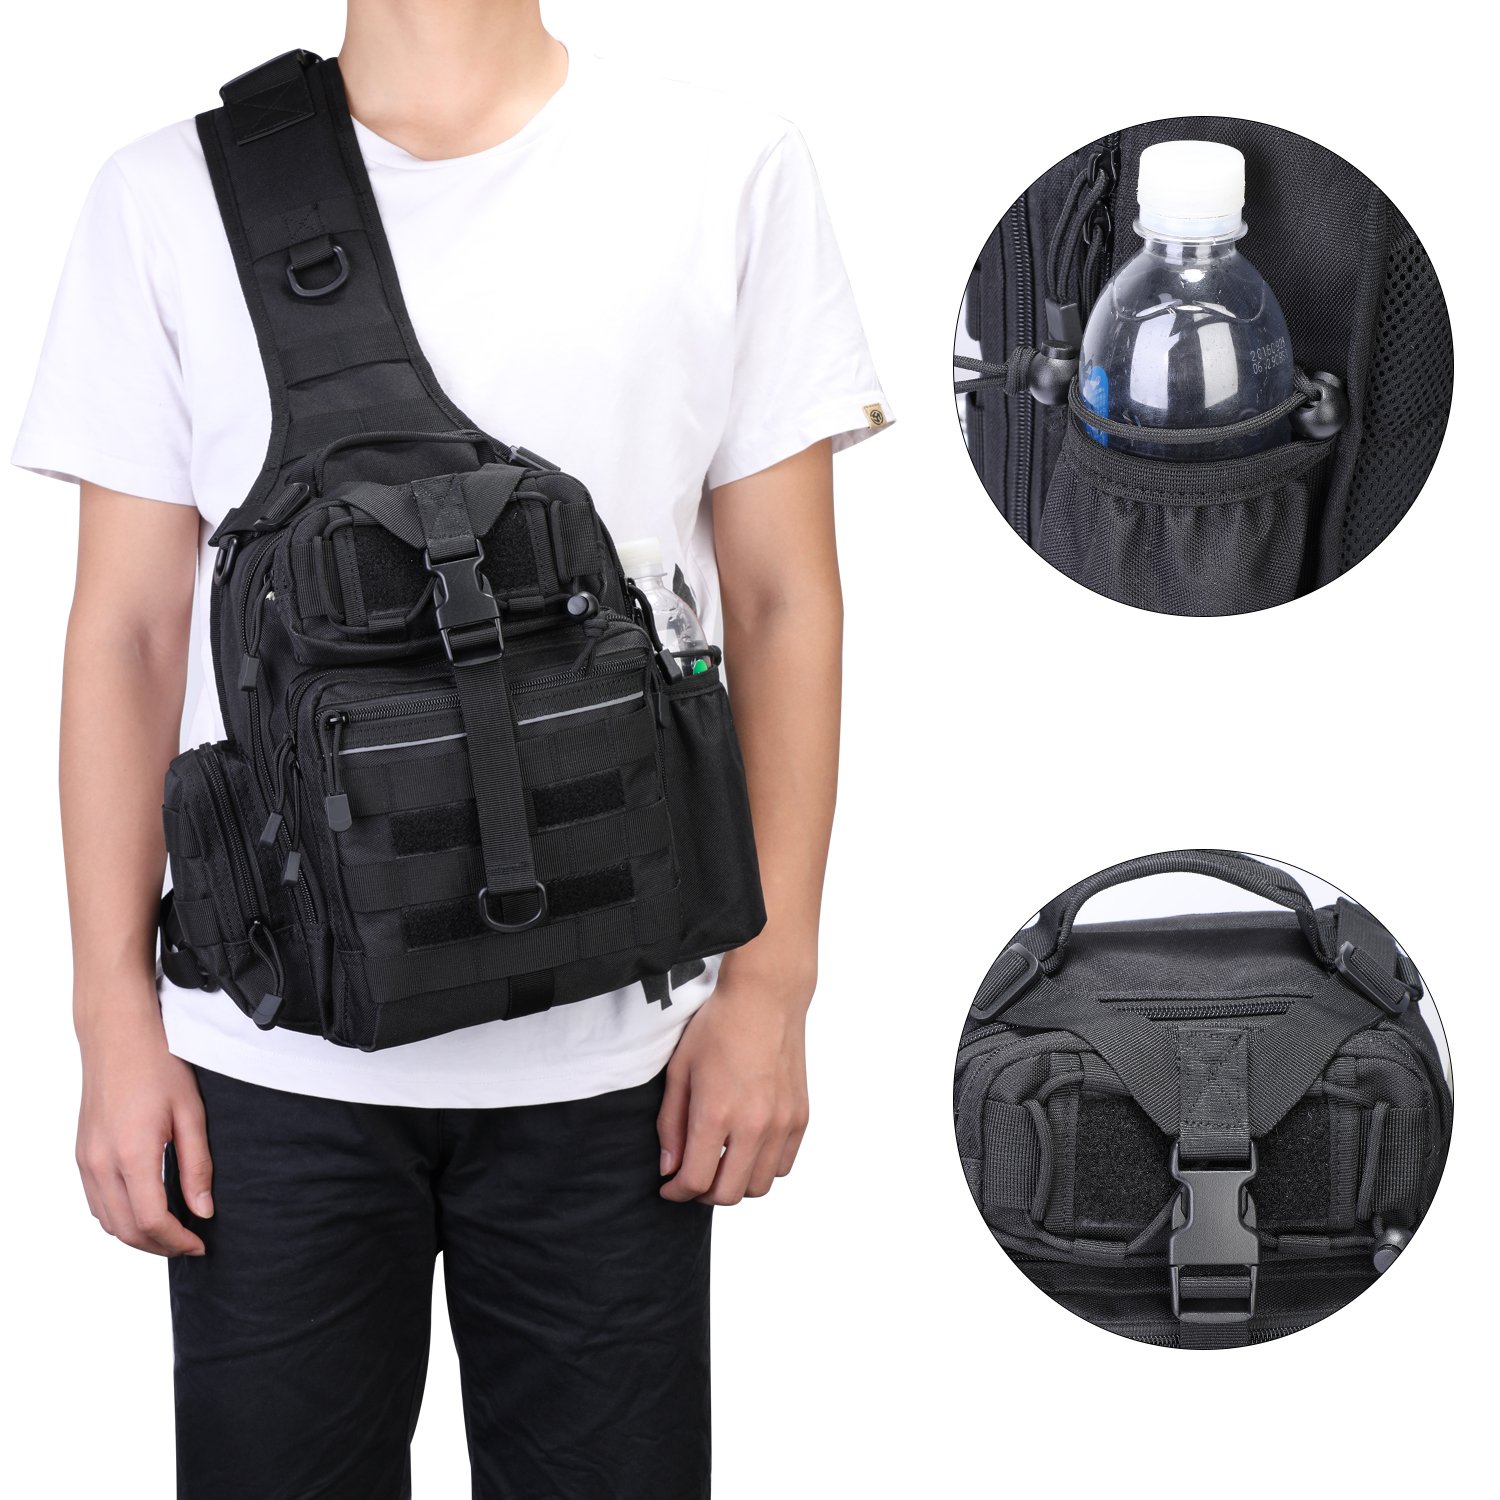 Tactical Sling Backpack Military EDC Shoulder Chest Bag for $16.14 Shipped from Amazon